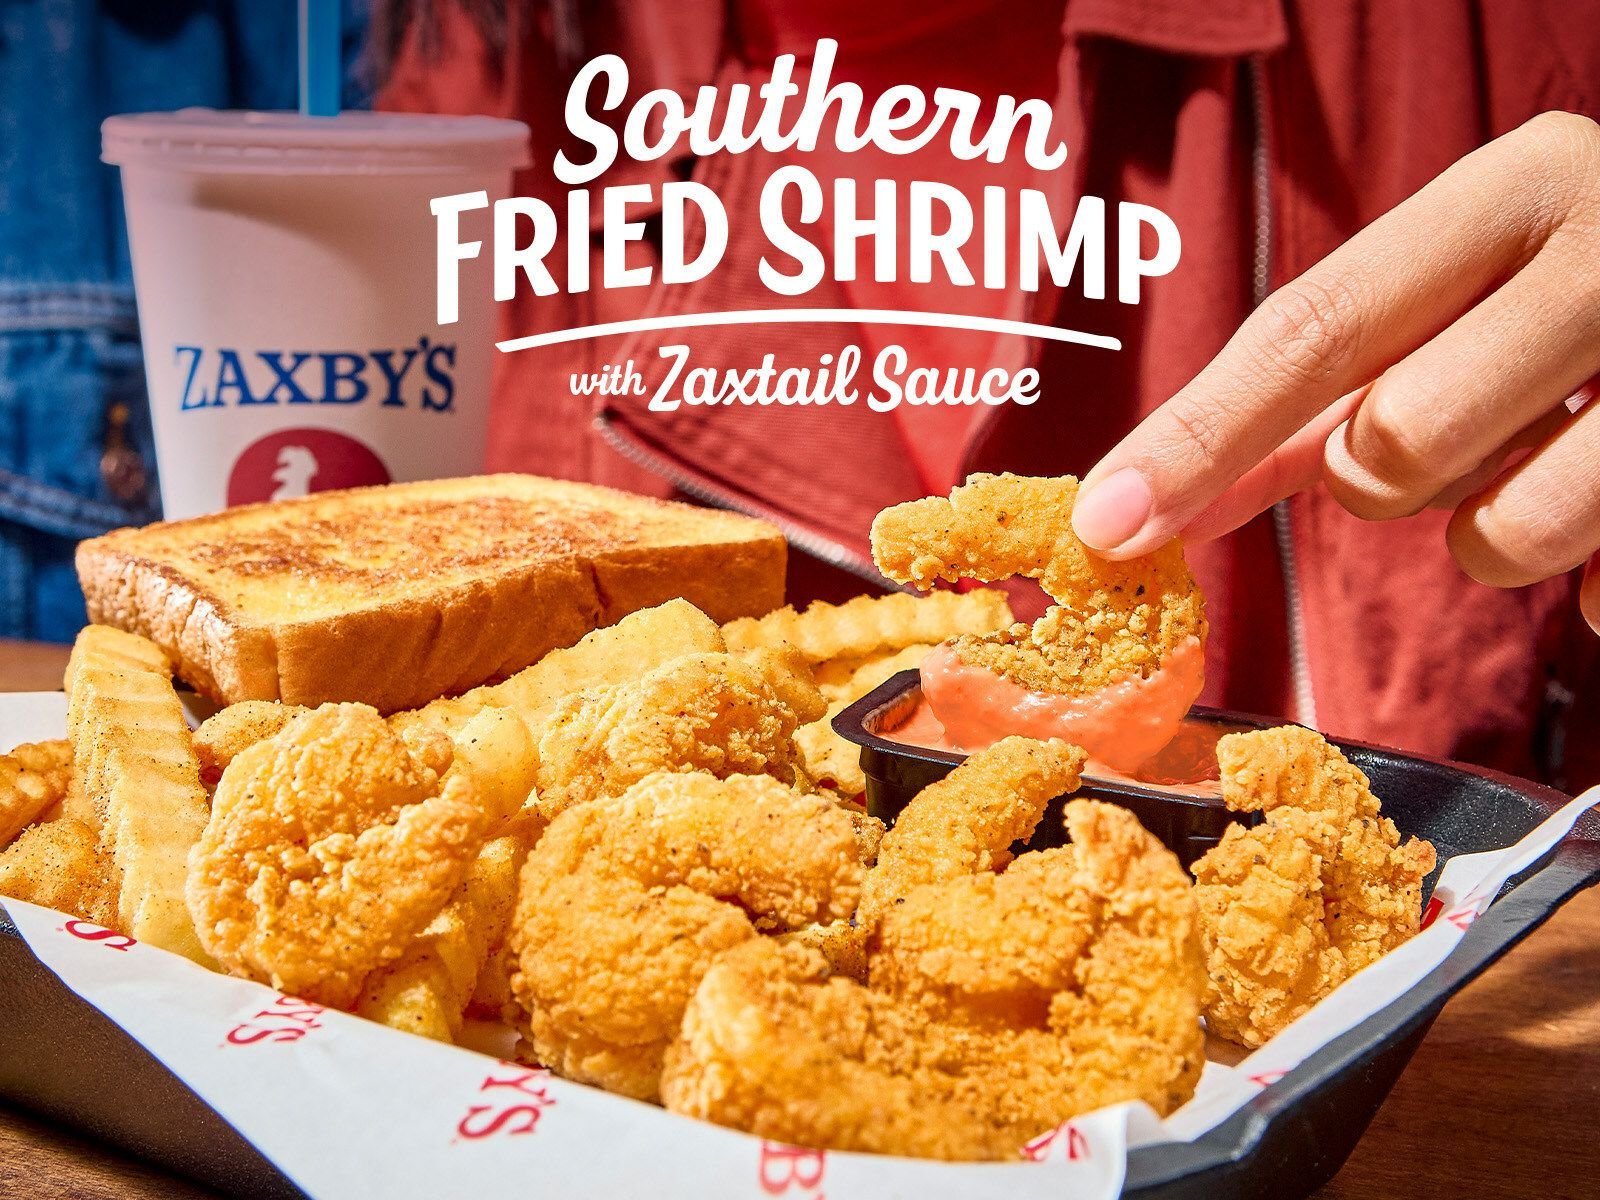 Have Ya’ll Tried That Fried Shrimp From Zaxbys? BUSSIN like a MF!! 🍤